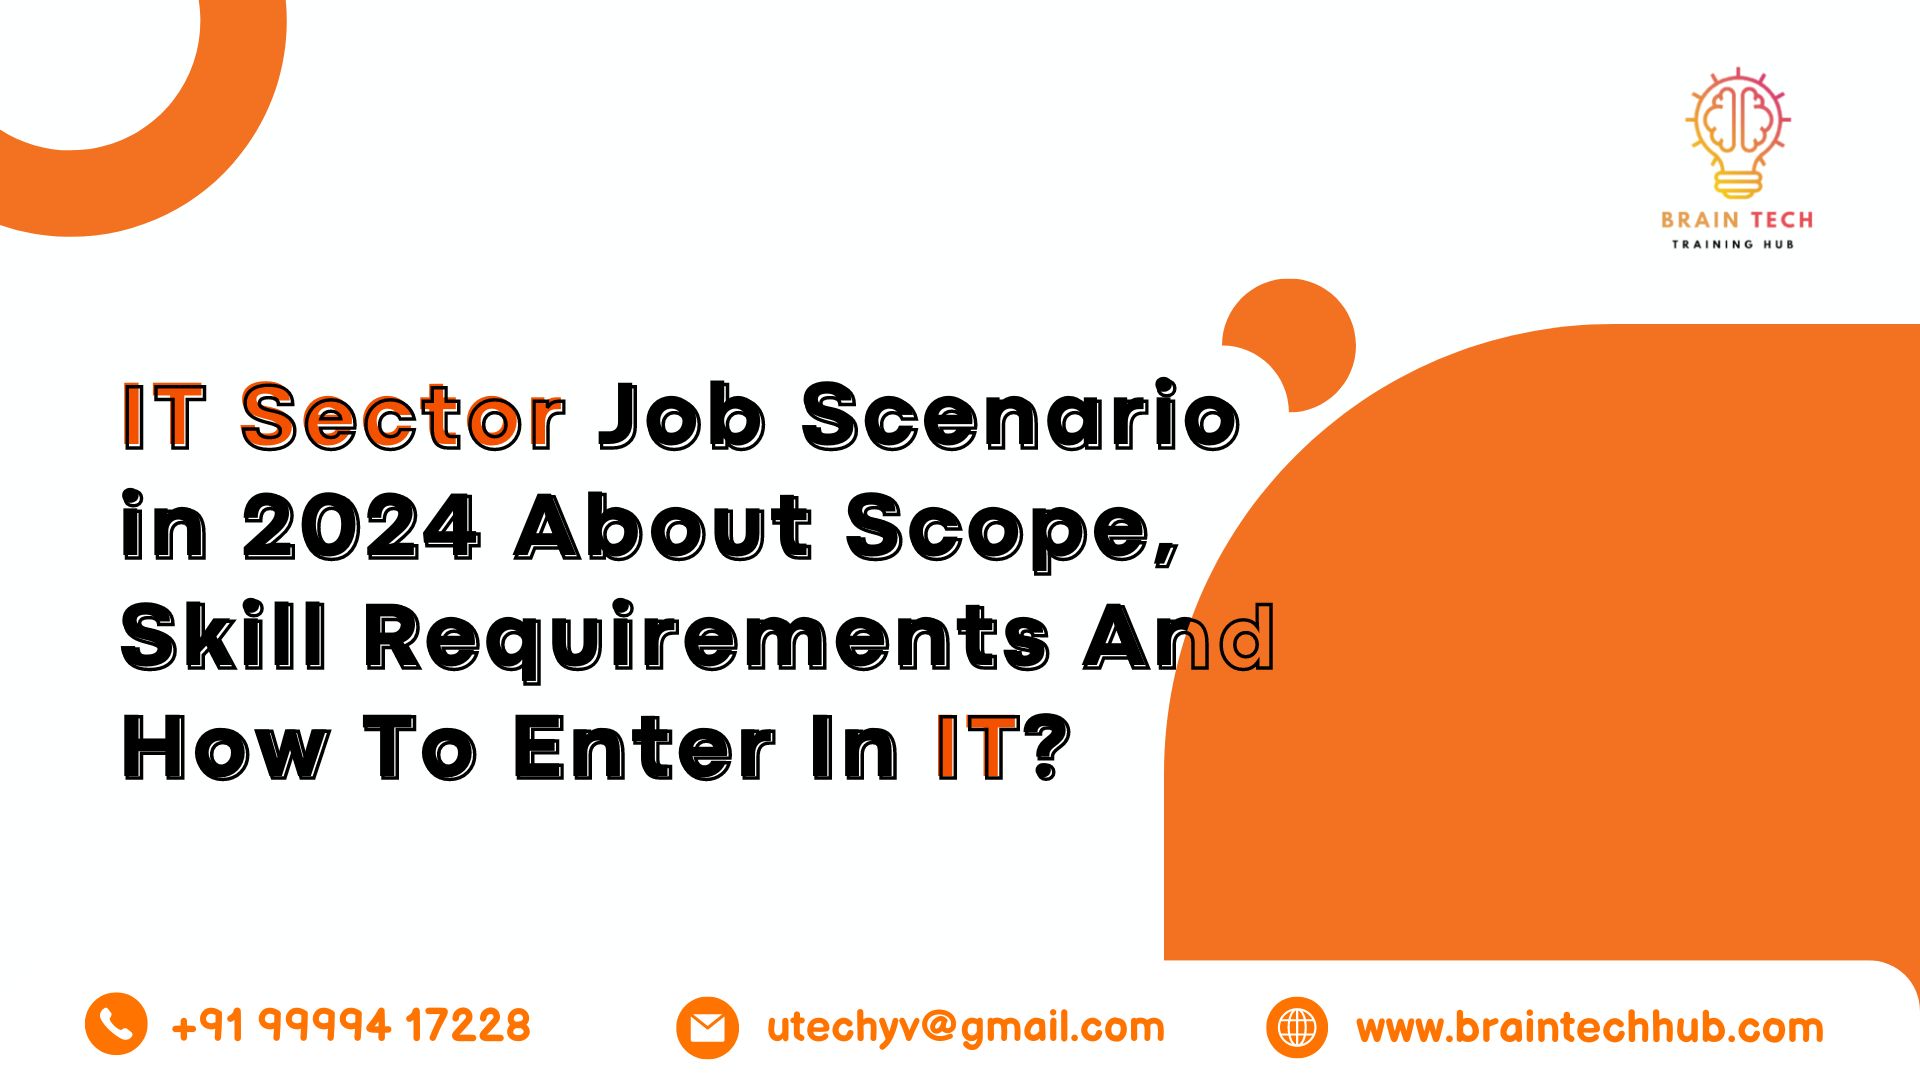 IT Sector Job Scenario in 2024 About Scope, Skill Requirements And How To Enter In IT